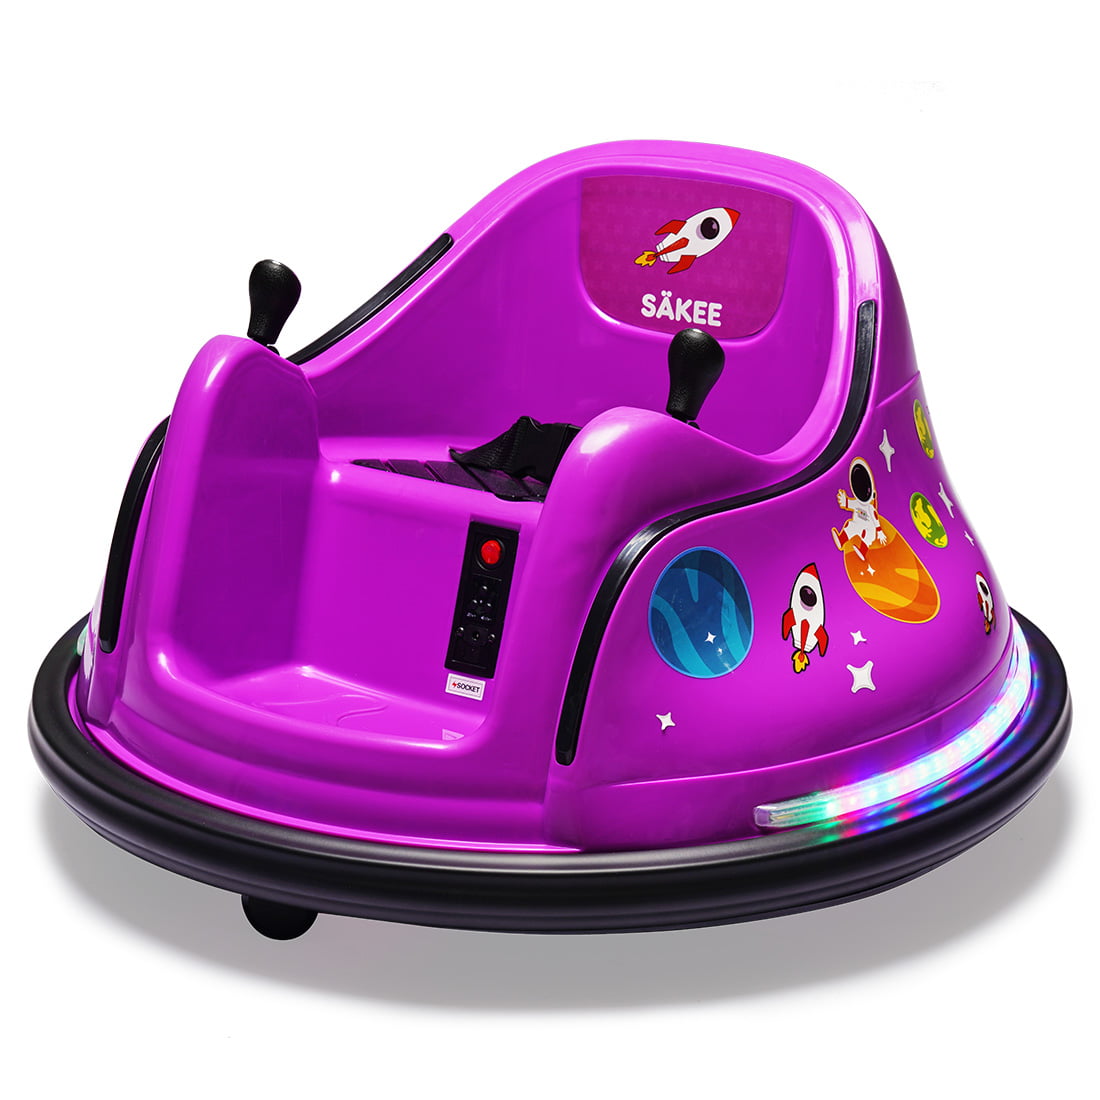 Details about   Ride On Bumper Car Toys For Toddlers Aged 1.5 6V Battery-Powered With Light ❤️ 